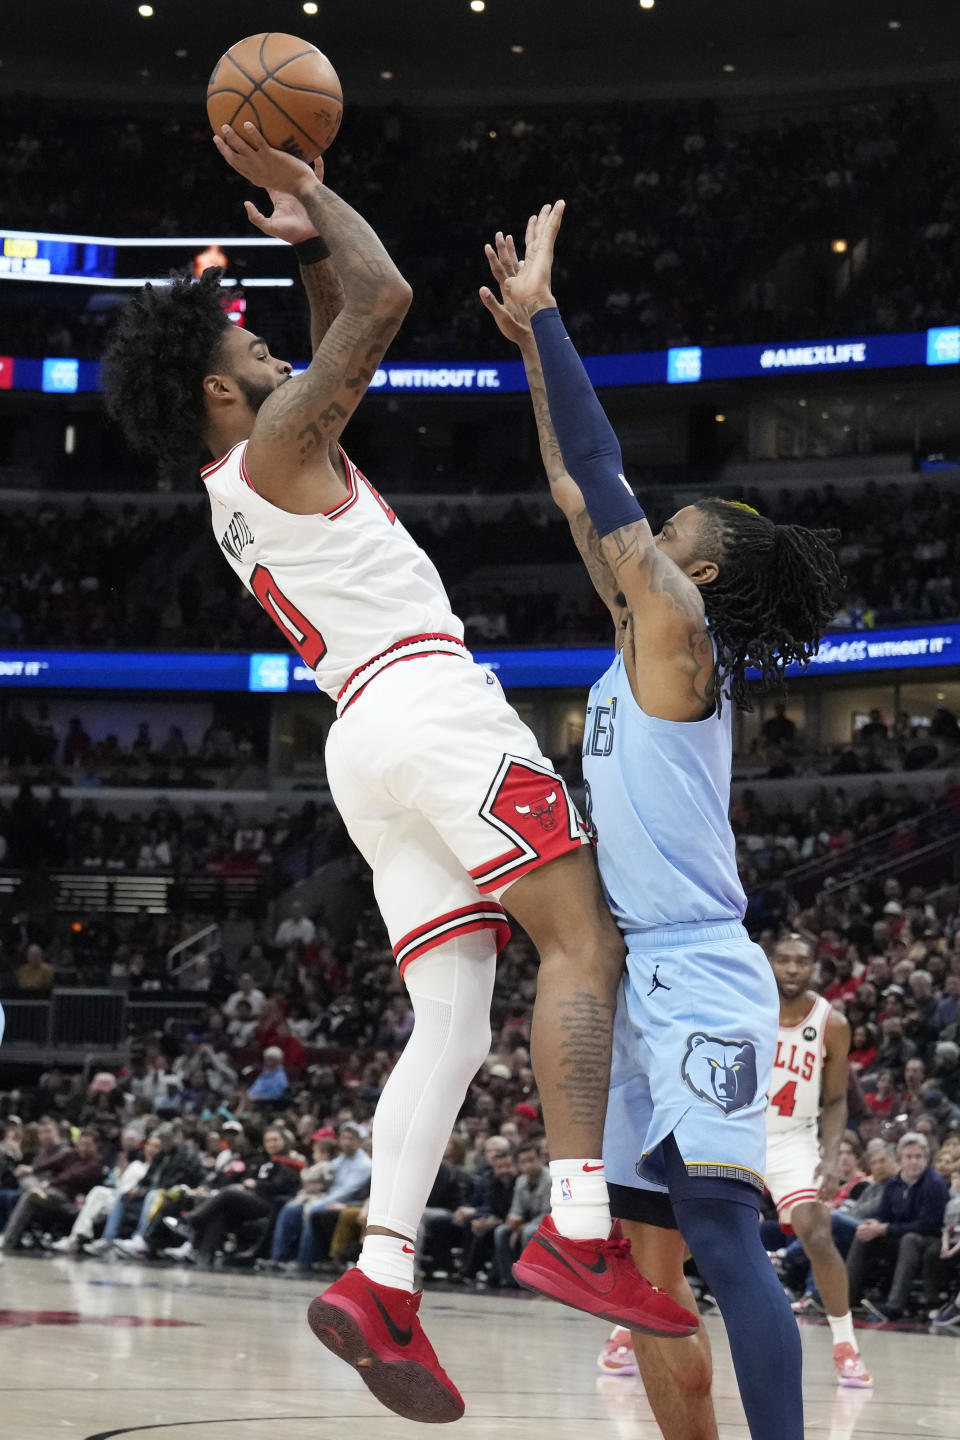 Chicago Bulls guard Coby White, left, shoots over Memphis Grizzlies guard Ja Morant during the first half of an NBA basketball game in Chicago, Sunday, April 2, 2023. (AP Photo/Nam Y. Huh)